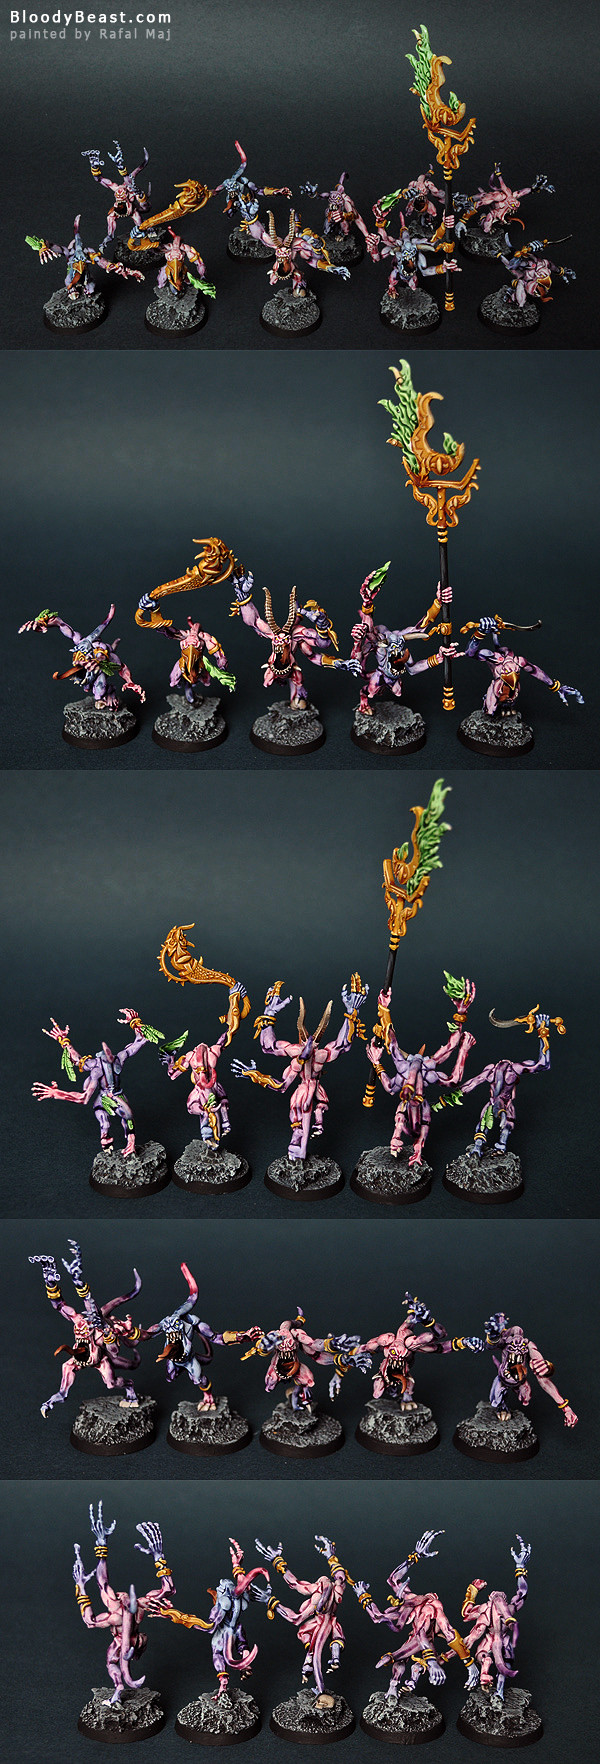 Horrors of Tzeentch with Command painted by Rafal Maj (BloodyBeast.com)